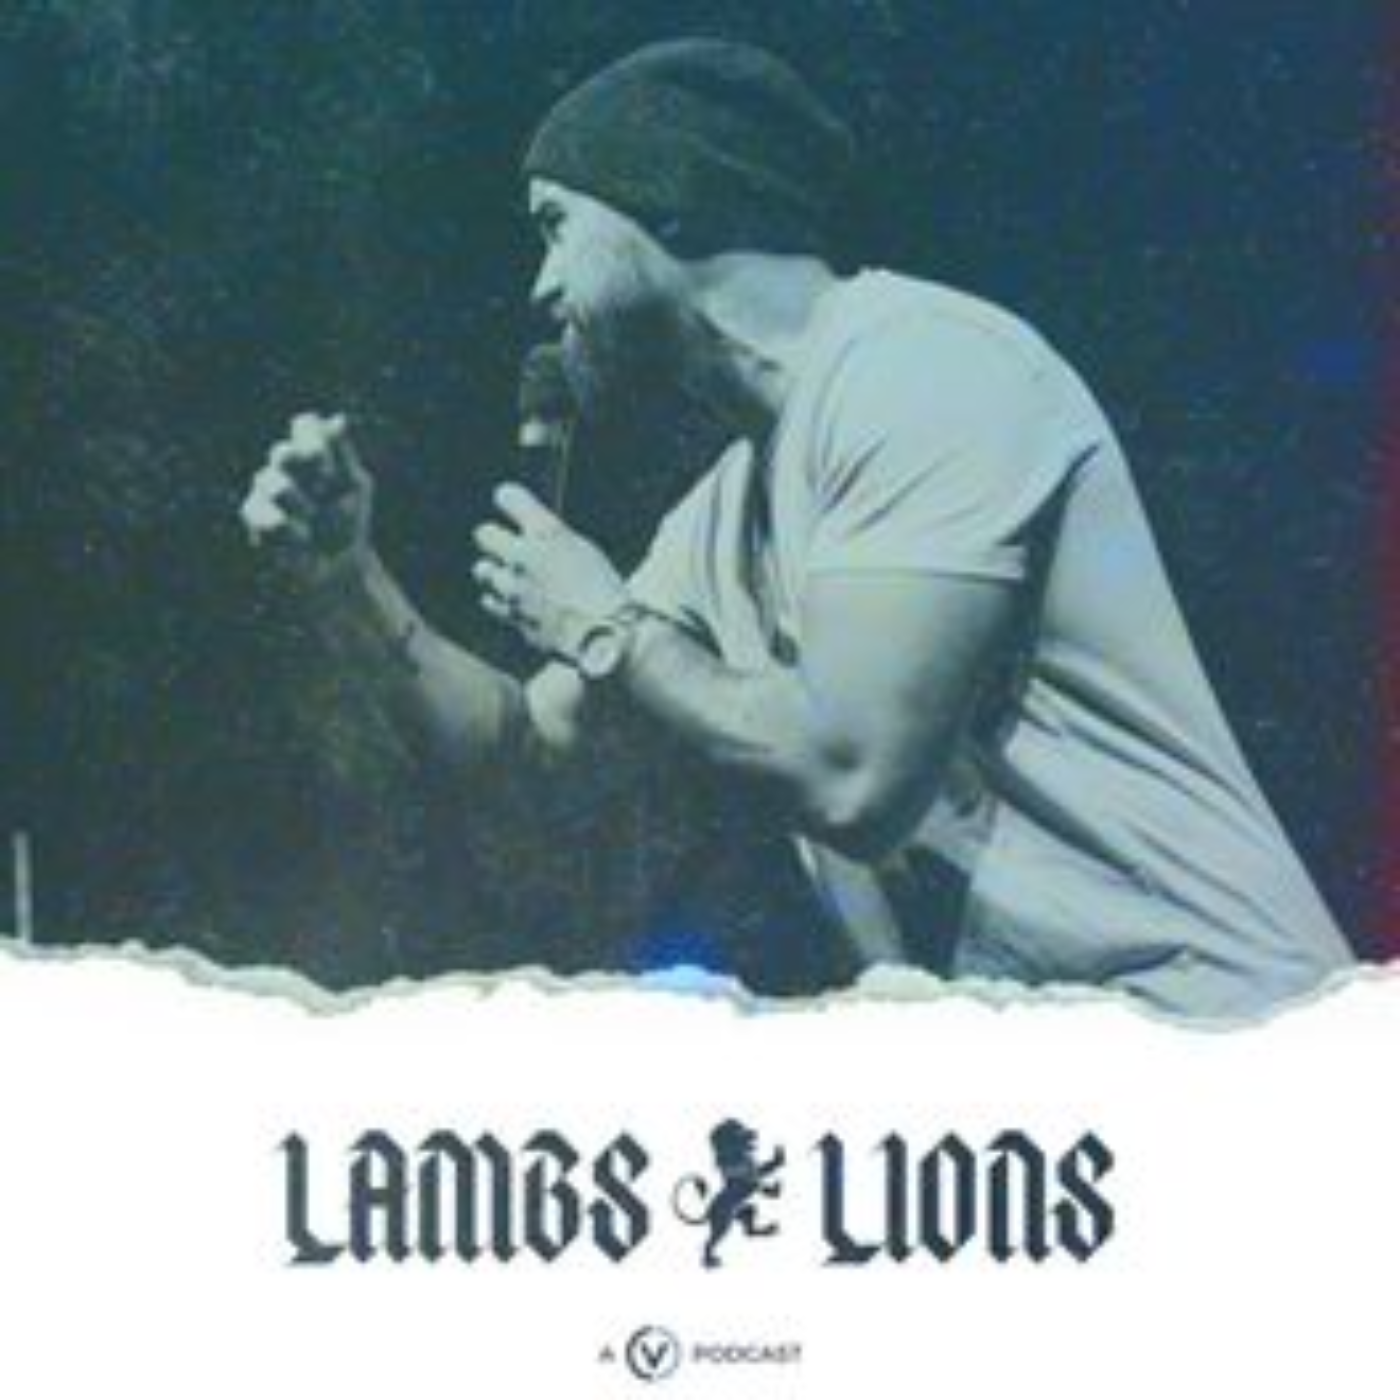 LAMBS TO LIONS Episode 119 (From Ken to Men ft. Coach Delton Harasym)